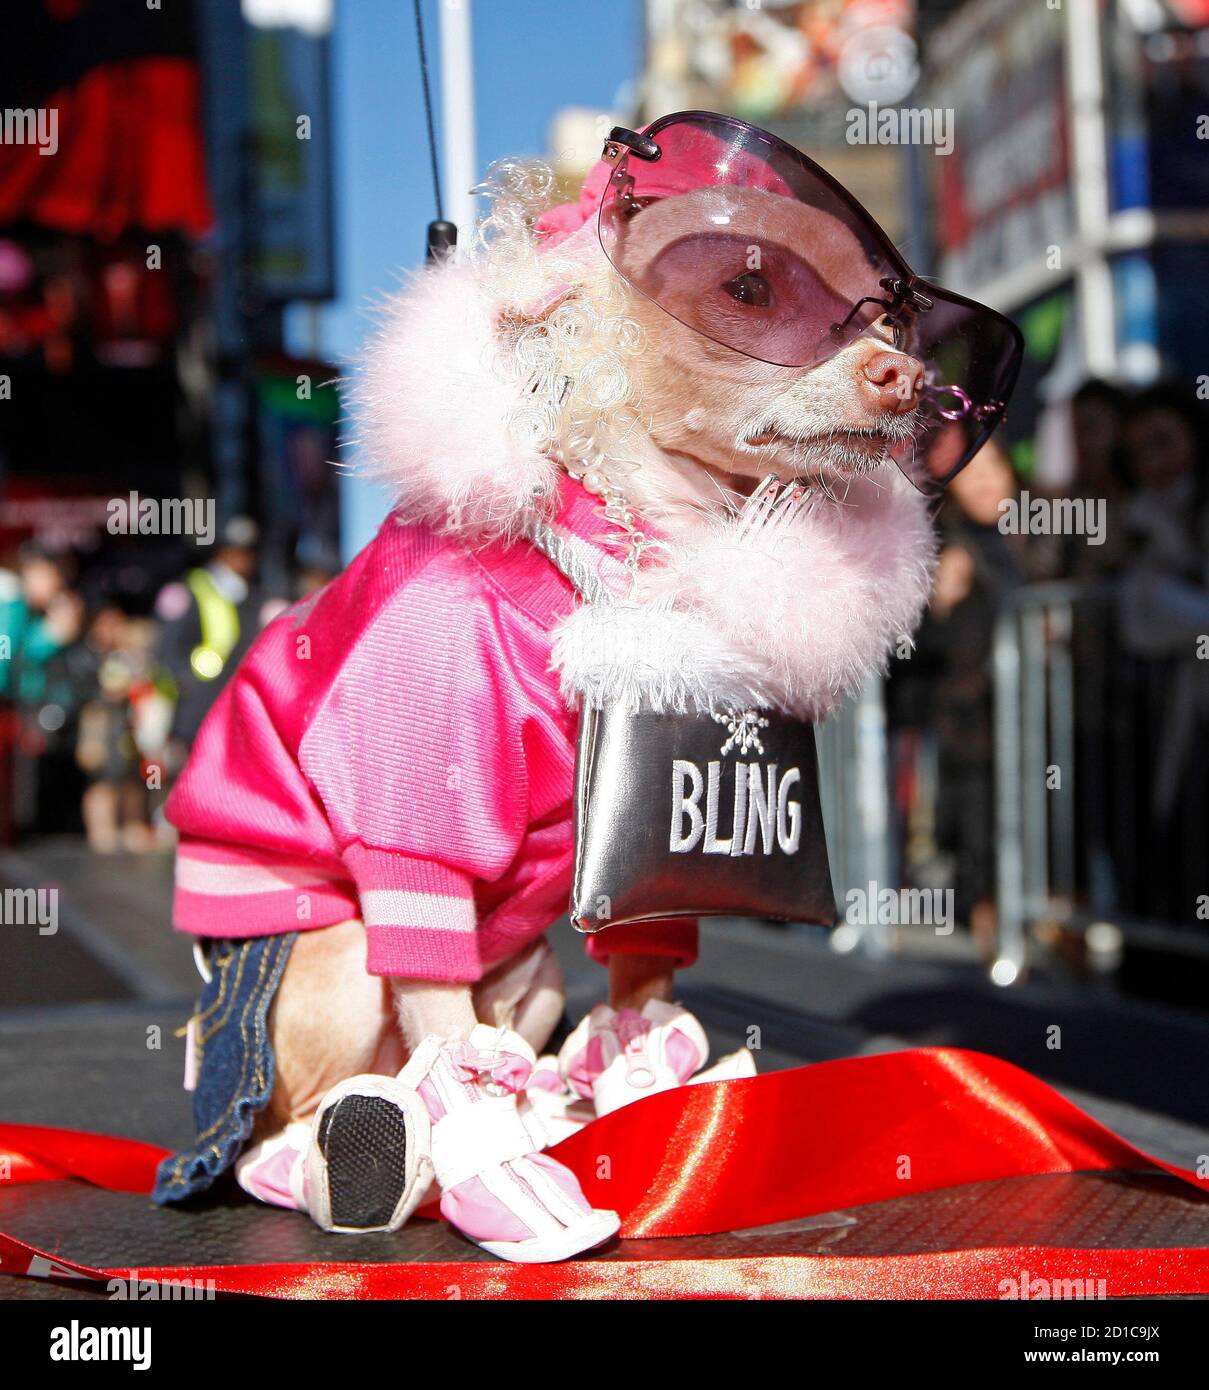 Peanut, a pet chihuahua, poses after winning the Dog Day Masquerade, an  annual costume contest, in Times Square, New York October 19, 2008. Peanut  was dressed as Elle Woods, the main character